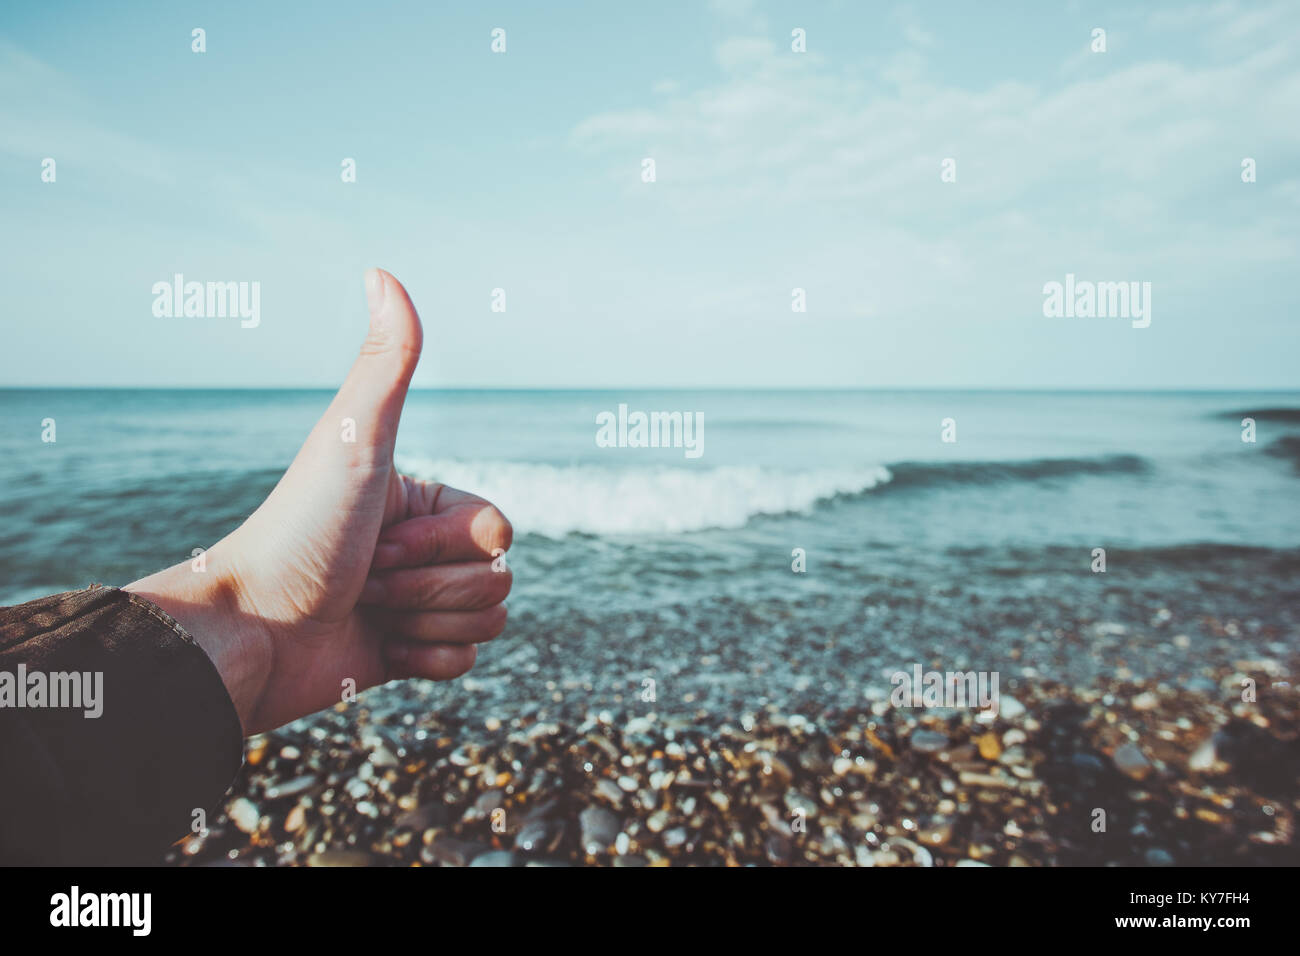 Hand showing like emotions and Sea summer Landscape Travel Lifestyle calm and tranquility scenic view summer vacations Stock Photo